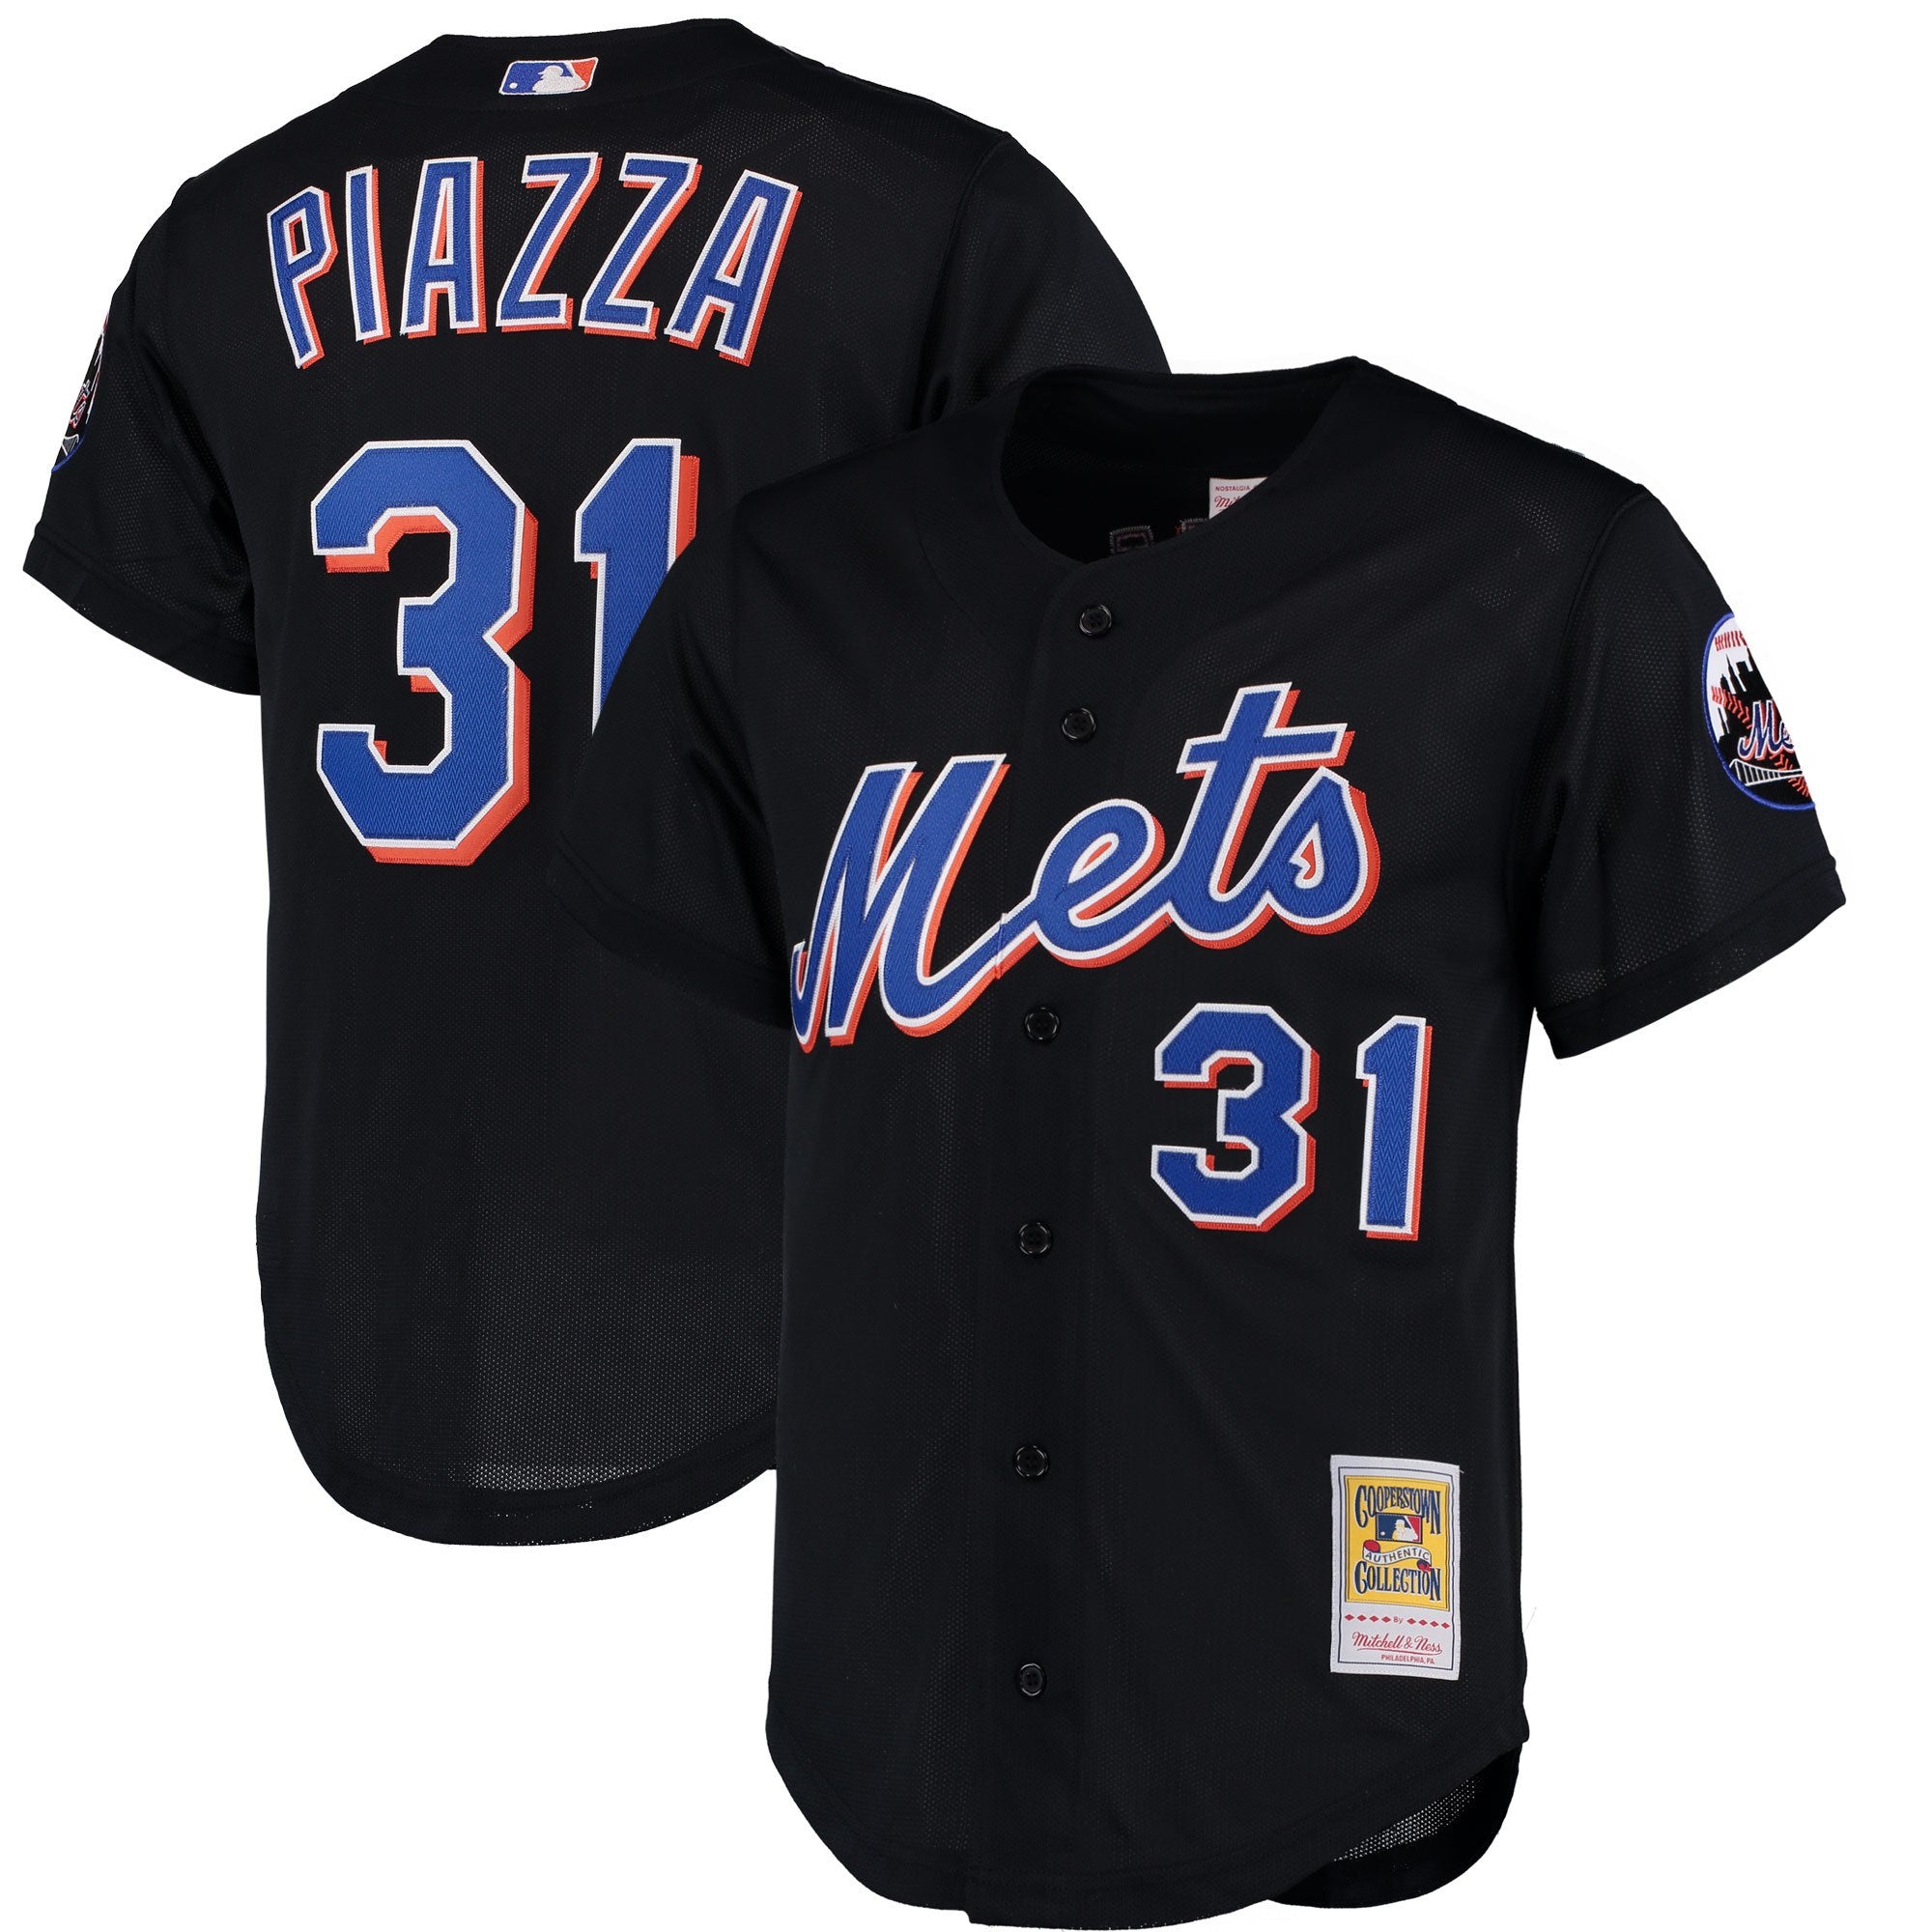 Lids Mike Piazza New York Mets Fanatics Authentic Autographed Black  Mitchell and Ness Cooperstown Collection Batting Practice Replica Jersey